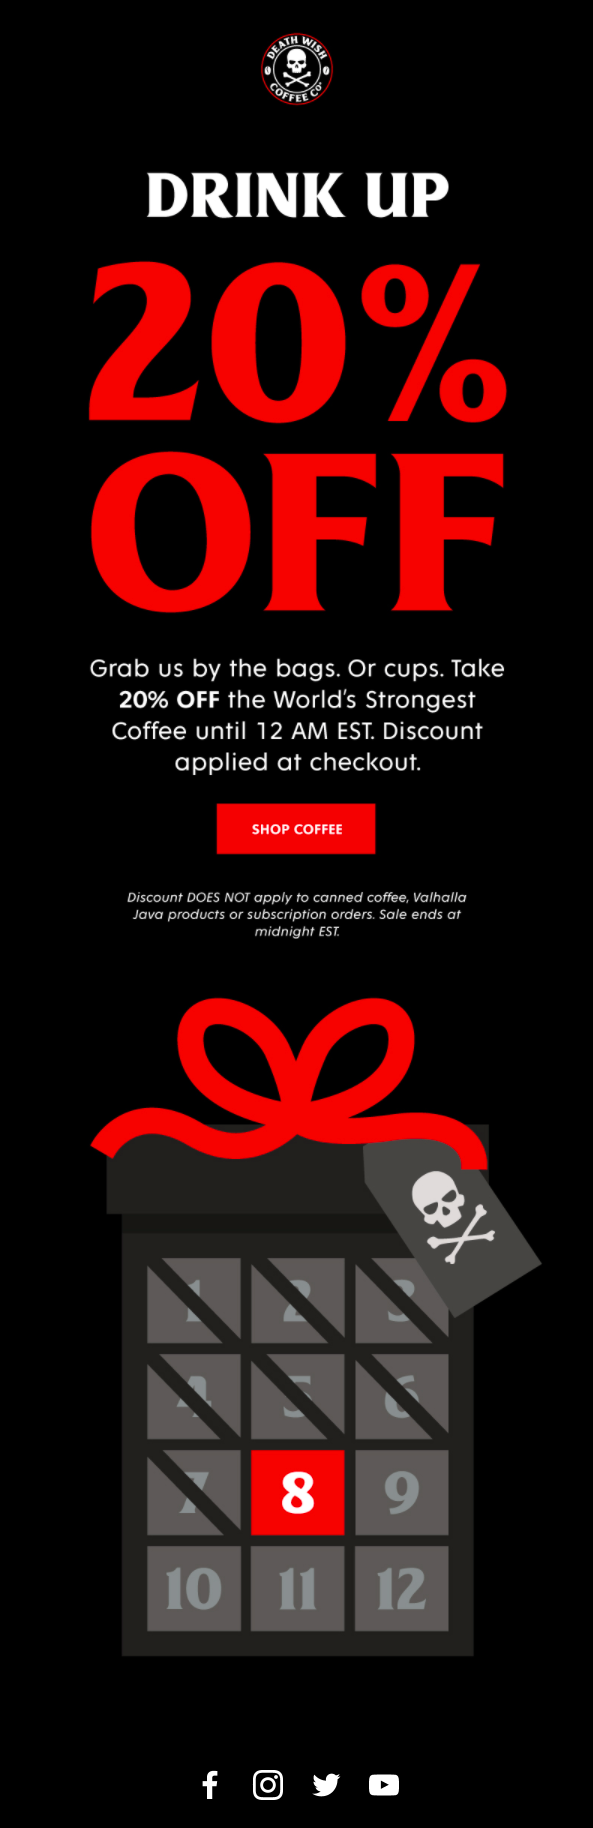 10 Limited-Time Email Campaign Examples That Work